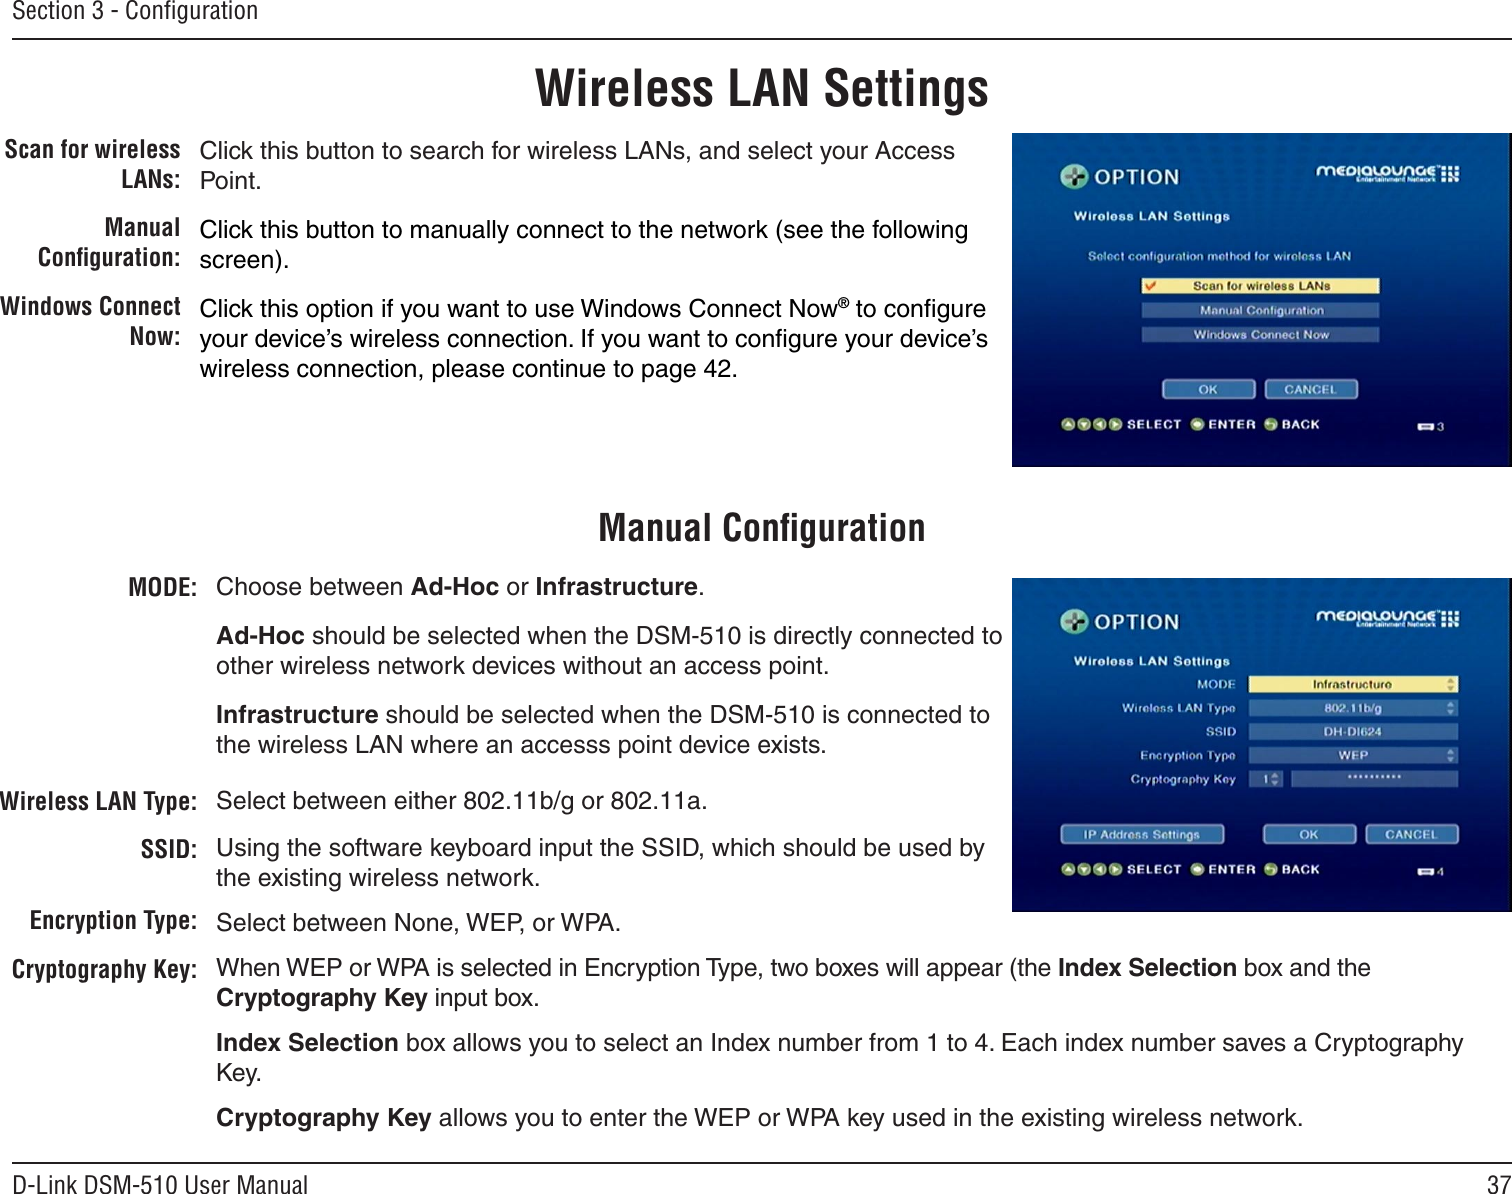 37D-Link DSM-510 User ManualSection 3 - ConﬁgurationWireless LAN SettingsScan for wireless LANs:Manual Conﬁguration:Windows Connect Now:Click this button to search for wireless LANs, and select your Access Point.Click this button to manually connect to the network (see the following screen).Click this option if you want to use Windows Connect Now® to conﬁgure your device’s wireless connection. If you want to conﬁgure your device’s wireless connection, please continue to page 42.MODE:Wireless LAN Type:SSID:Encryption Type:Cryptography Key:Choose between Ad-Hoc or Infrastructure. Ad-Hoc should be selected when the DSM-510 is directly connected to other wireless network devices without an access point. Infrastructure should be selected when the DSM-510 is connected to the wireless LAN where an accesss point device exists.Select between either 802.11b/g or 802.11a.Using the software keyboard input the SSID, which should be used by the existing wireless network.Select between None, WEP, or WPA.When WEP or WPA is selected in Encryption Type, two boxes will appear (the Index Selection box and the Cryptography Key input box.Index Selection box allows you to select an Index number from 1 to 4. Each index number saves a Cryptography Key.Cryptography Key allows you to enter the WEP or WPA key used in the existing wireless network.Manual Conﬁguration